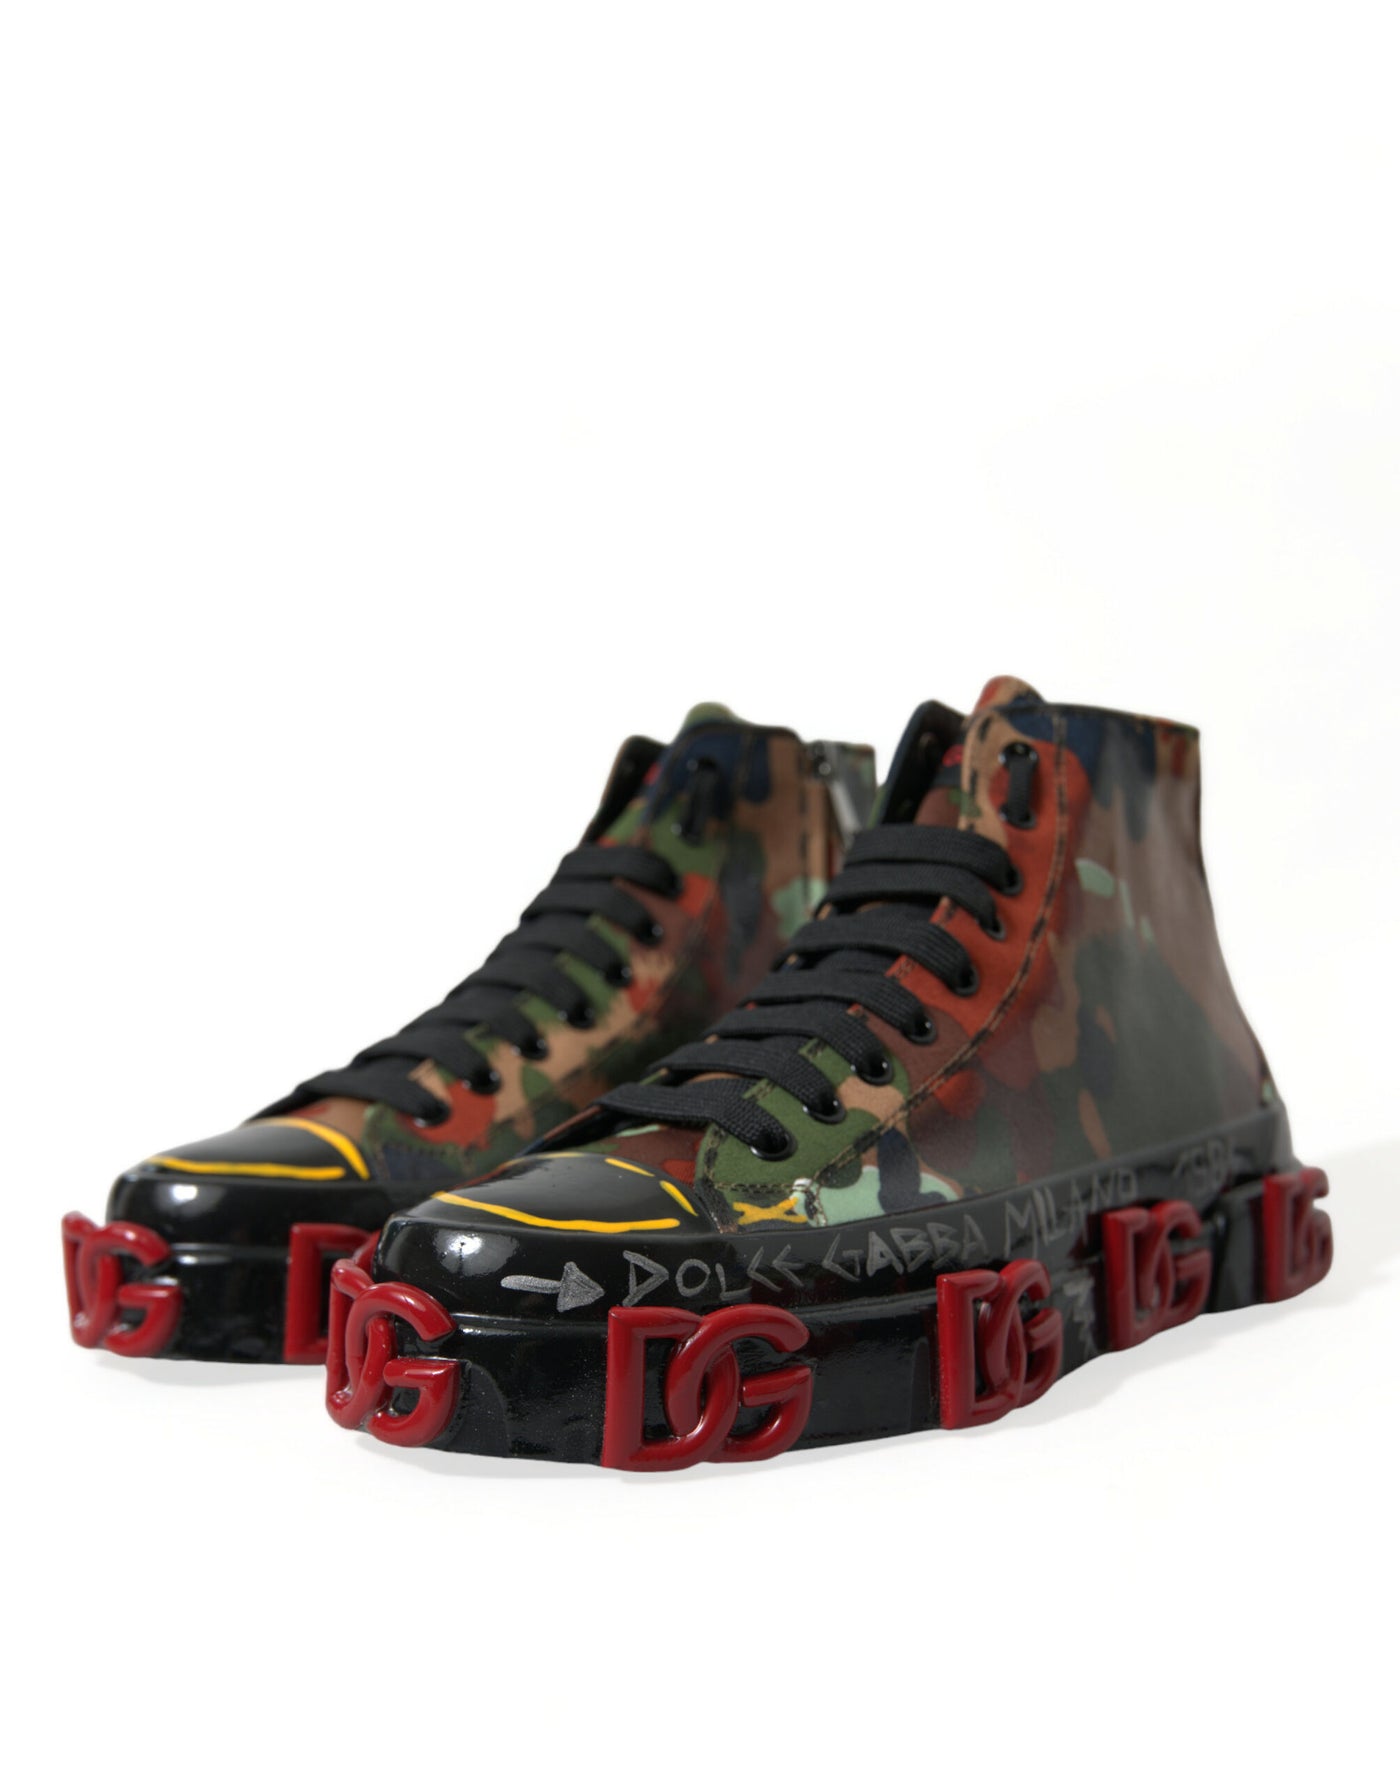 Dolce & Gabbana Multicolor Camouflage High Top Sneakers Shoes